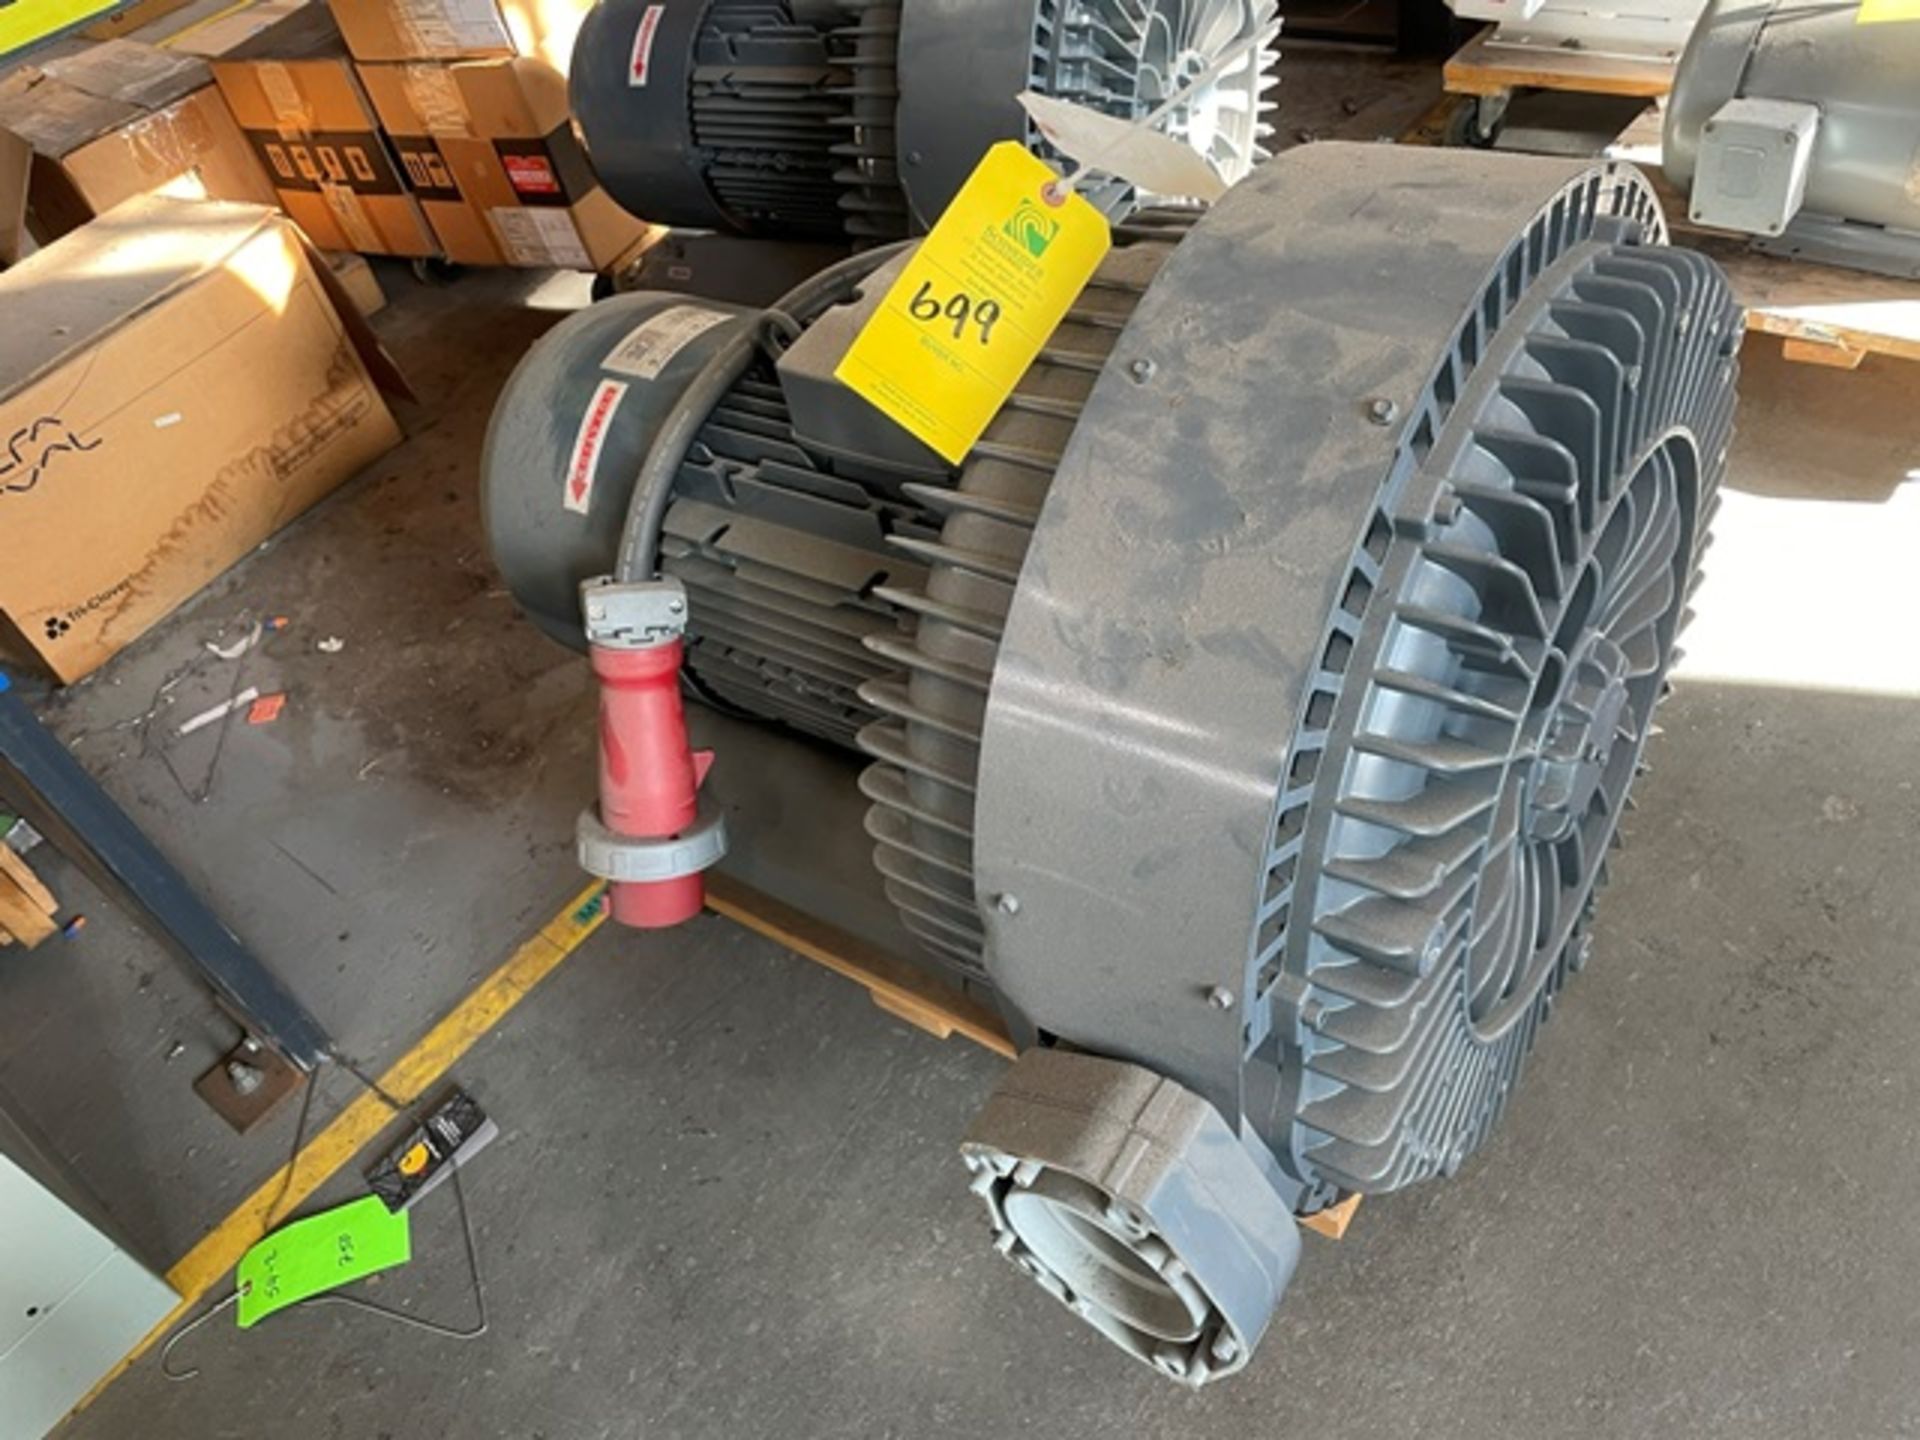 Republic Blower Systems HRP-1502 Emerson 30 HP Motor/Blower, Rigging & Loading Fee: $125